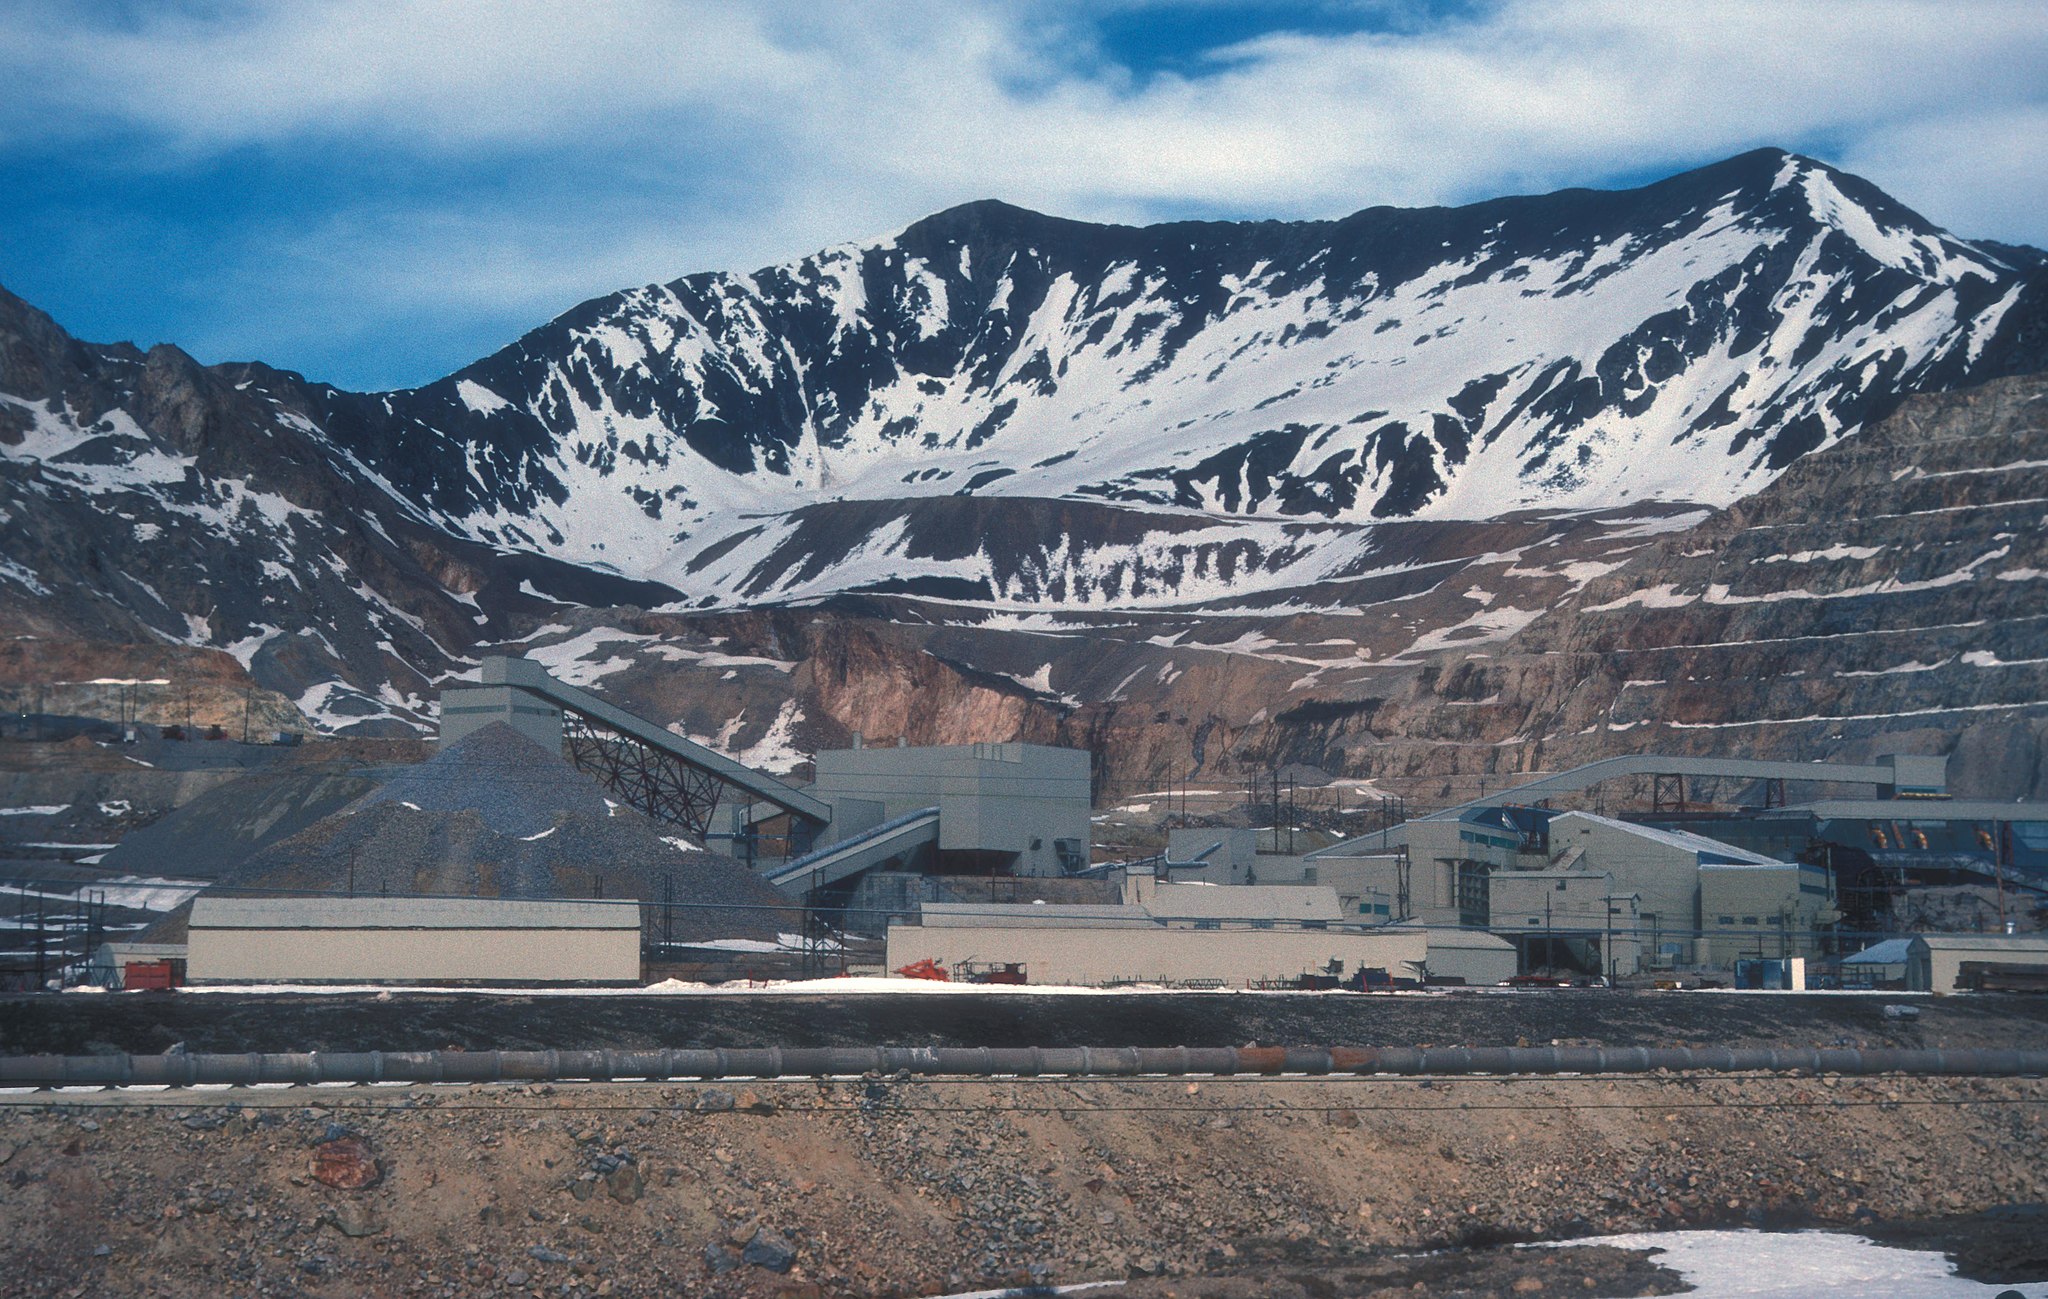 Climax Molybdenum Mine. JERRYE AND ROY KLOTZ MD (Own work) [CC BY-SA 3.0 (https://creativecommons.org/licenses/by-sa/3.0)], via Wikimedia Commons